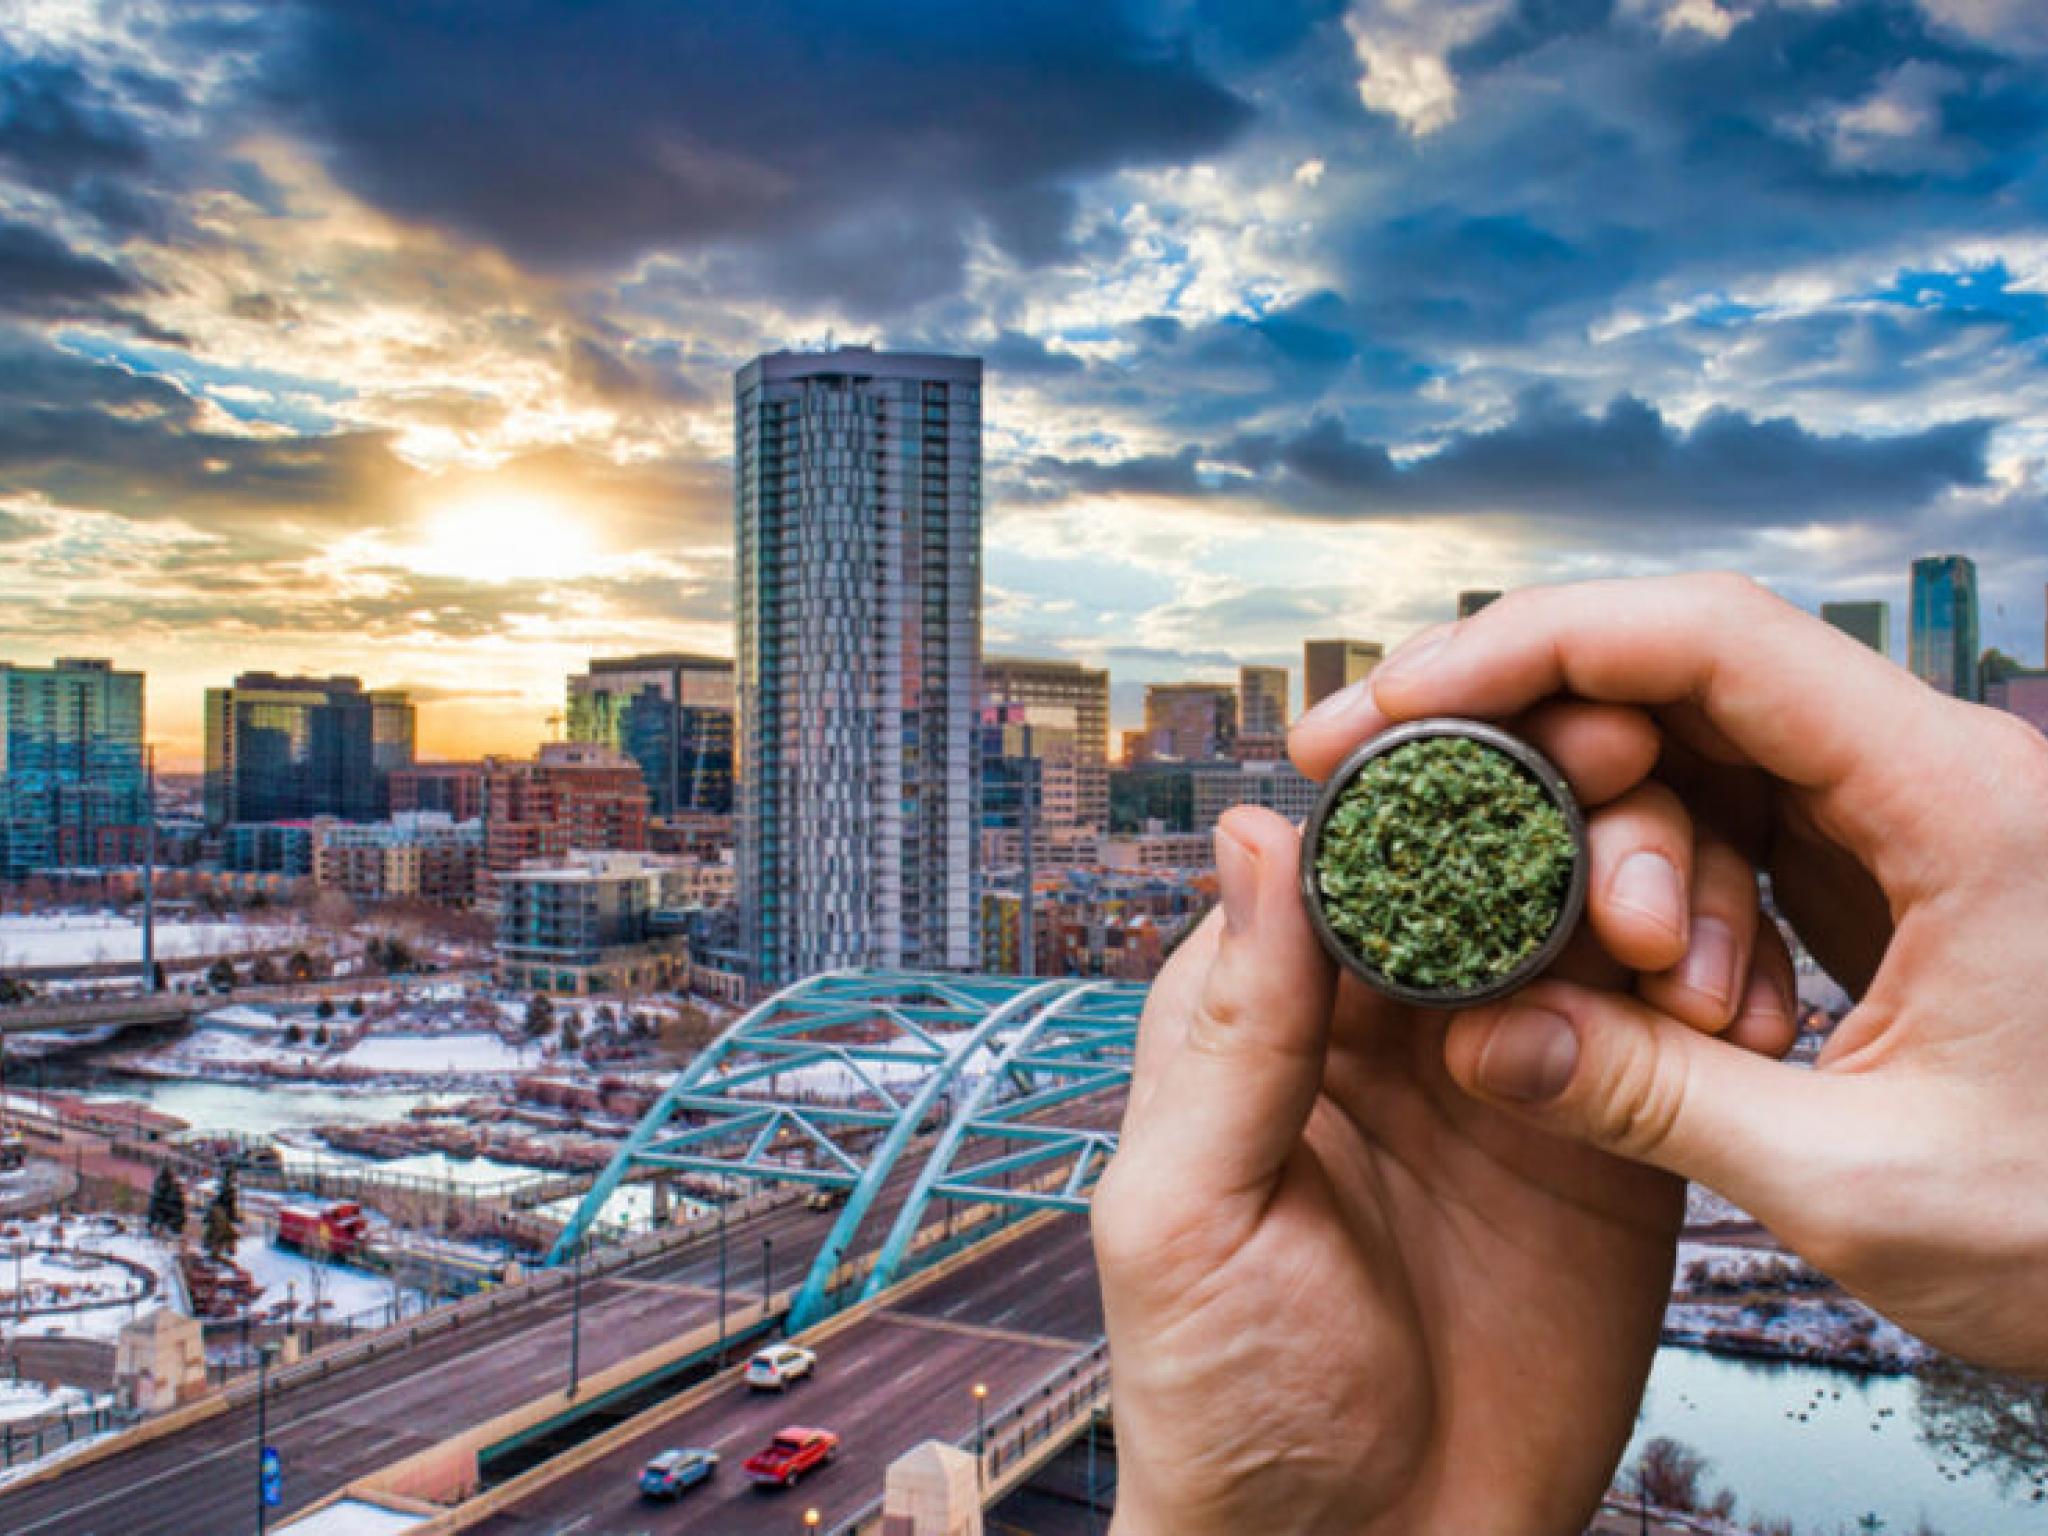  colorado-wants-to-simplify-cannabis-regulations-eliminate-fungus-testing-a-500-page-rulebook-is-too-long-lawmakers-say 